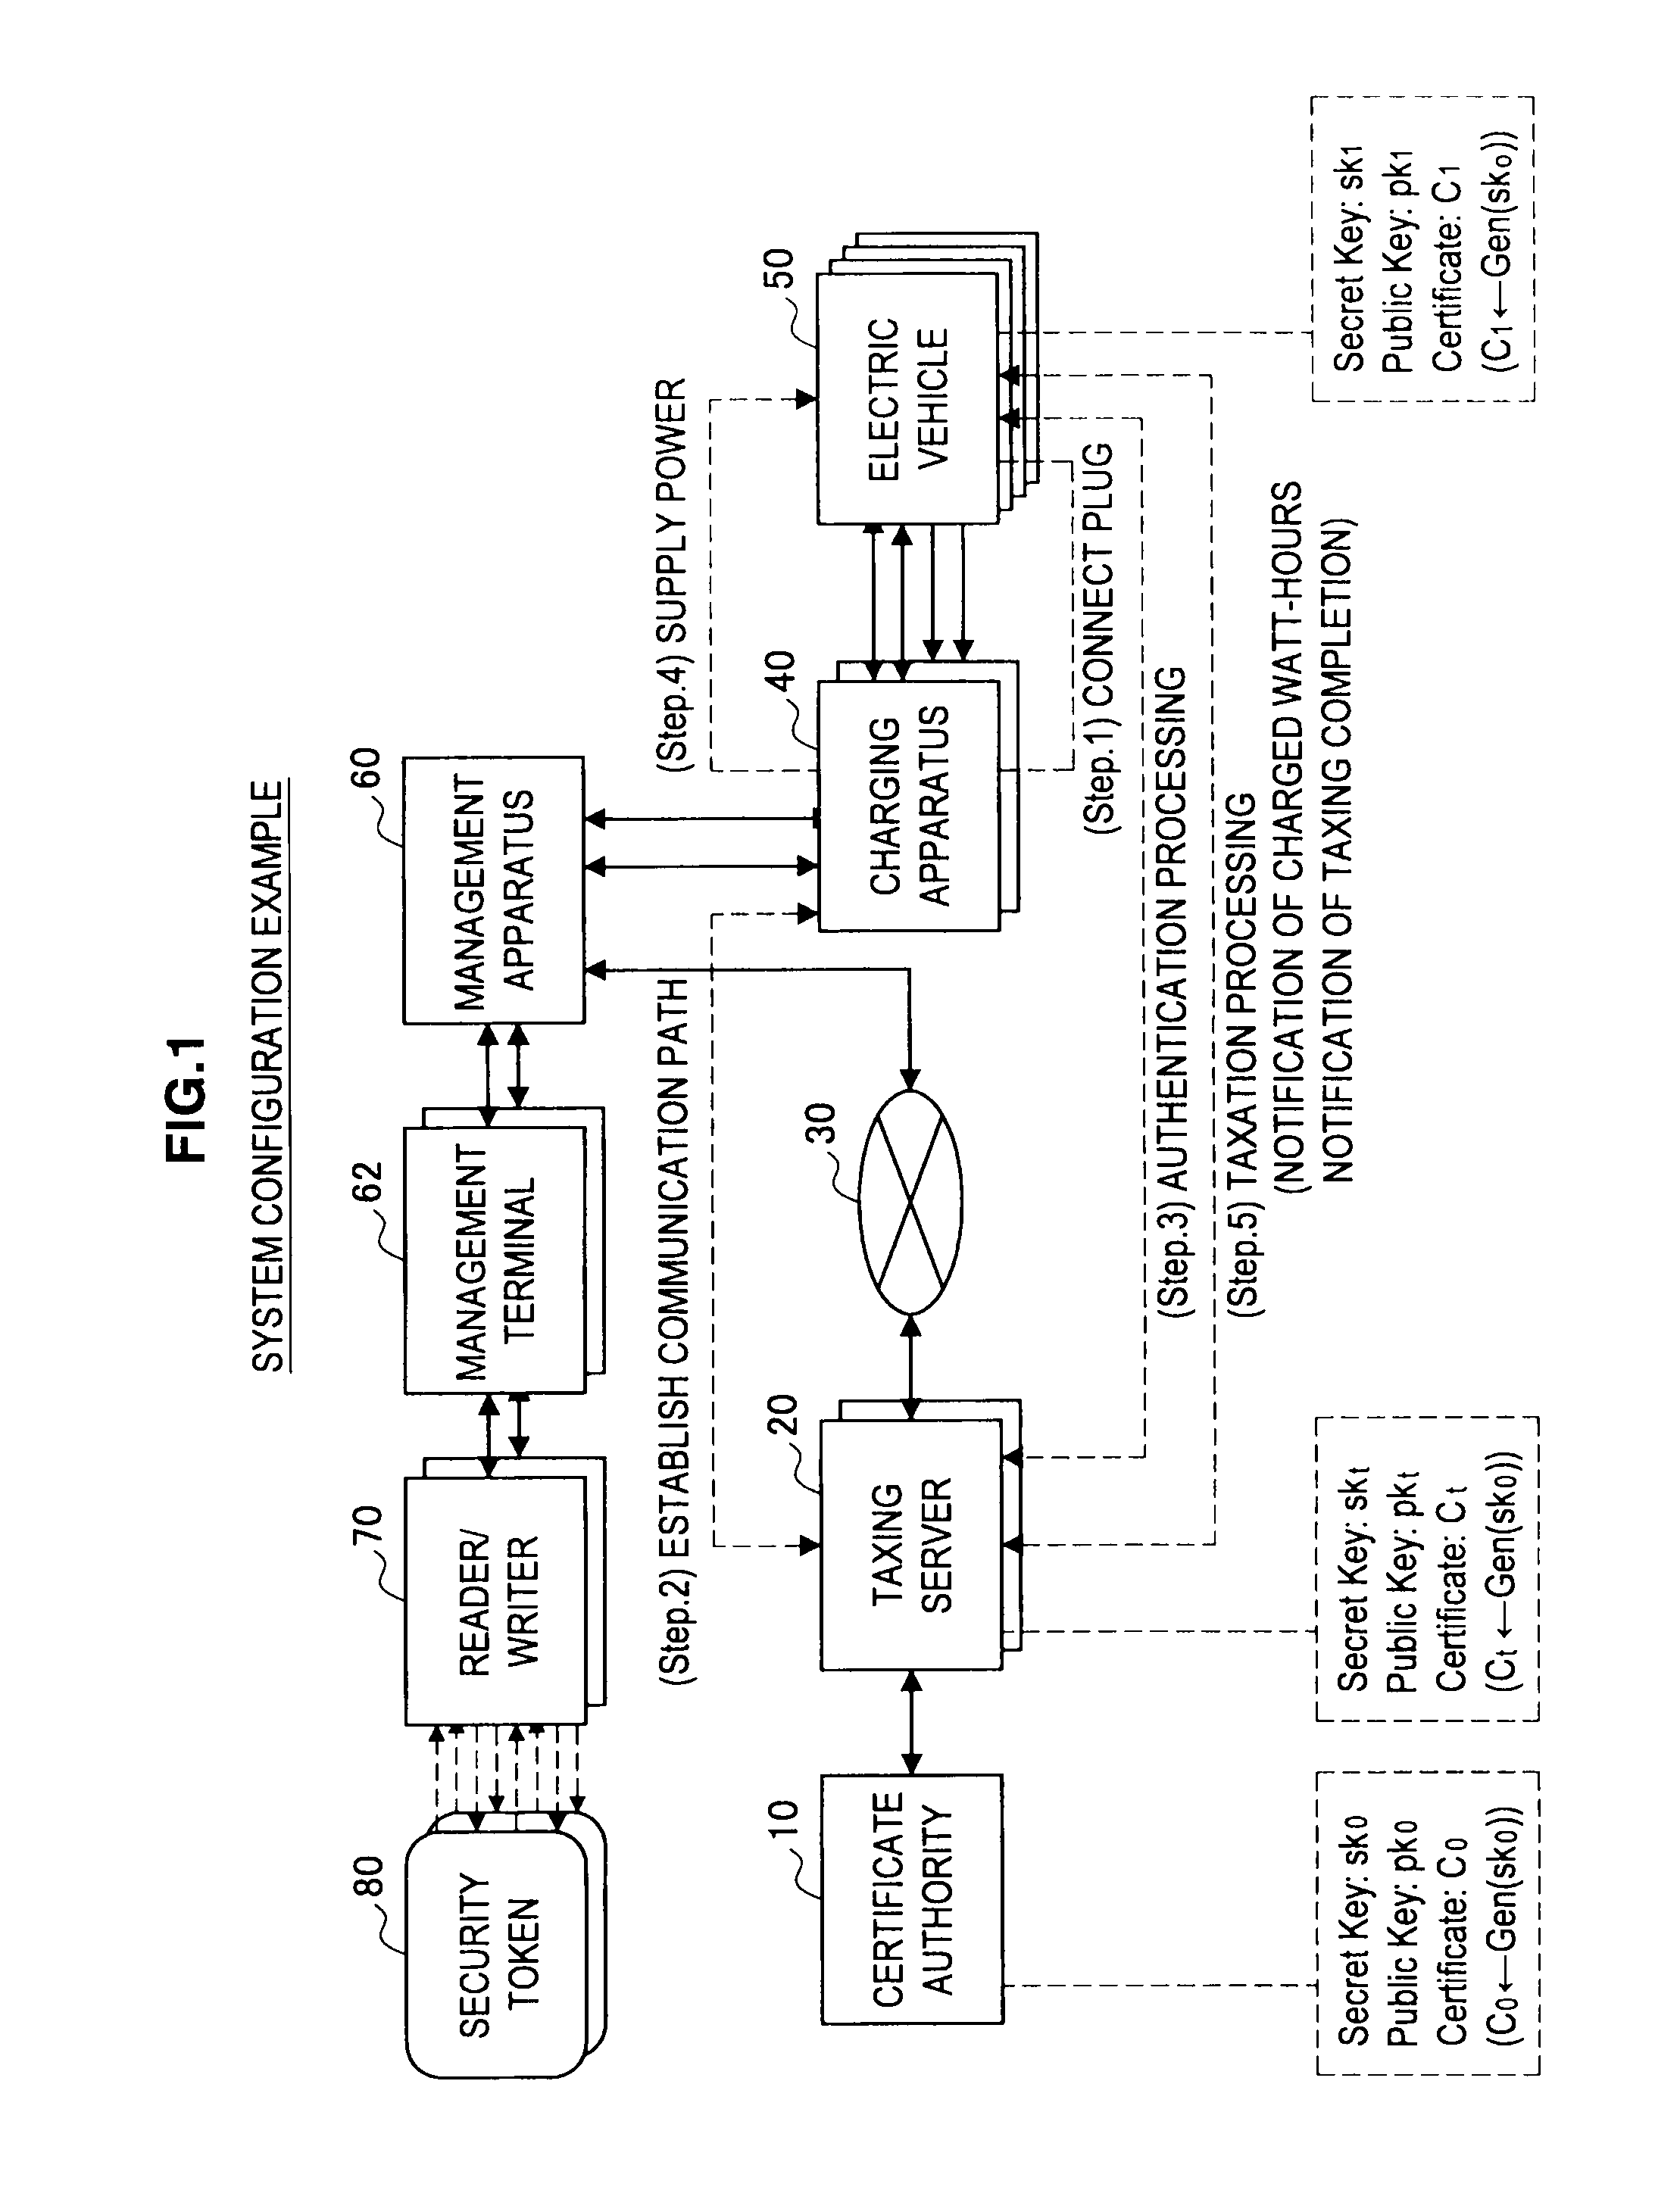 Electric vehicle, management apparatus, and drive management method